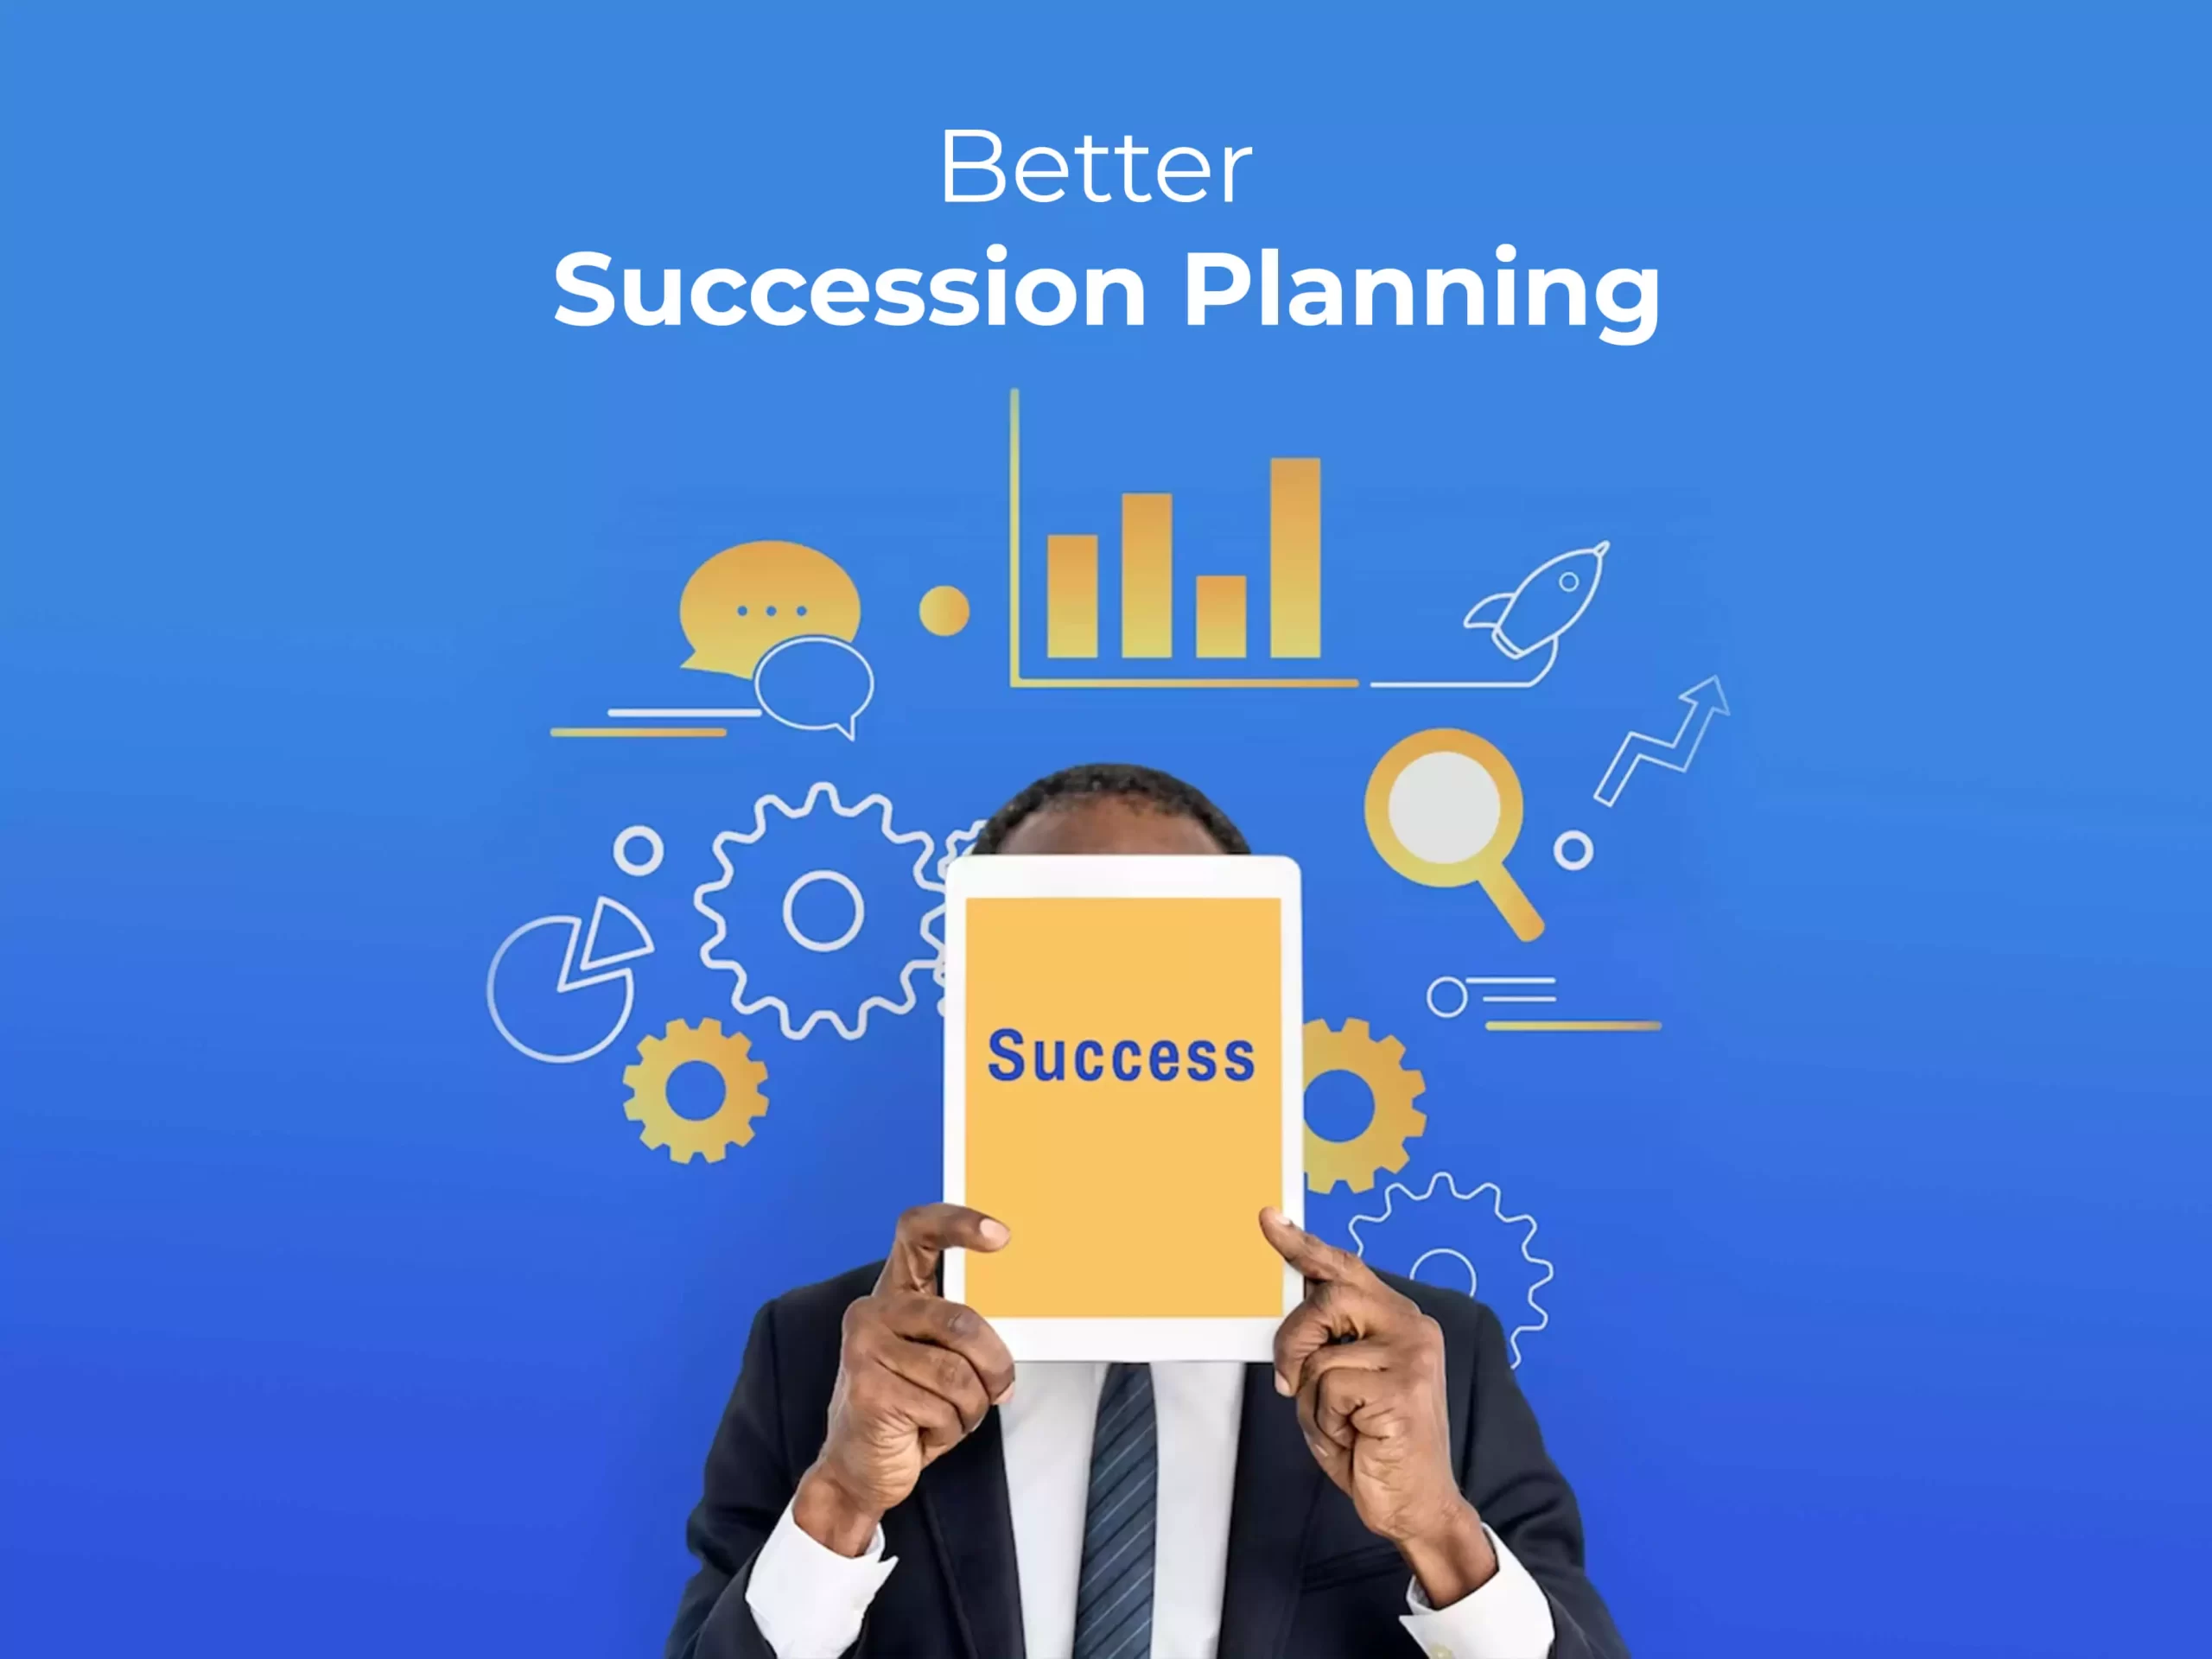 Better succession planning